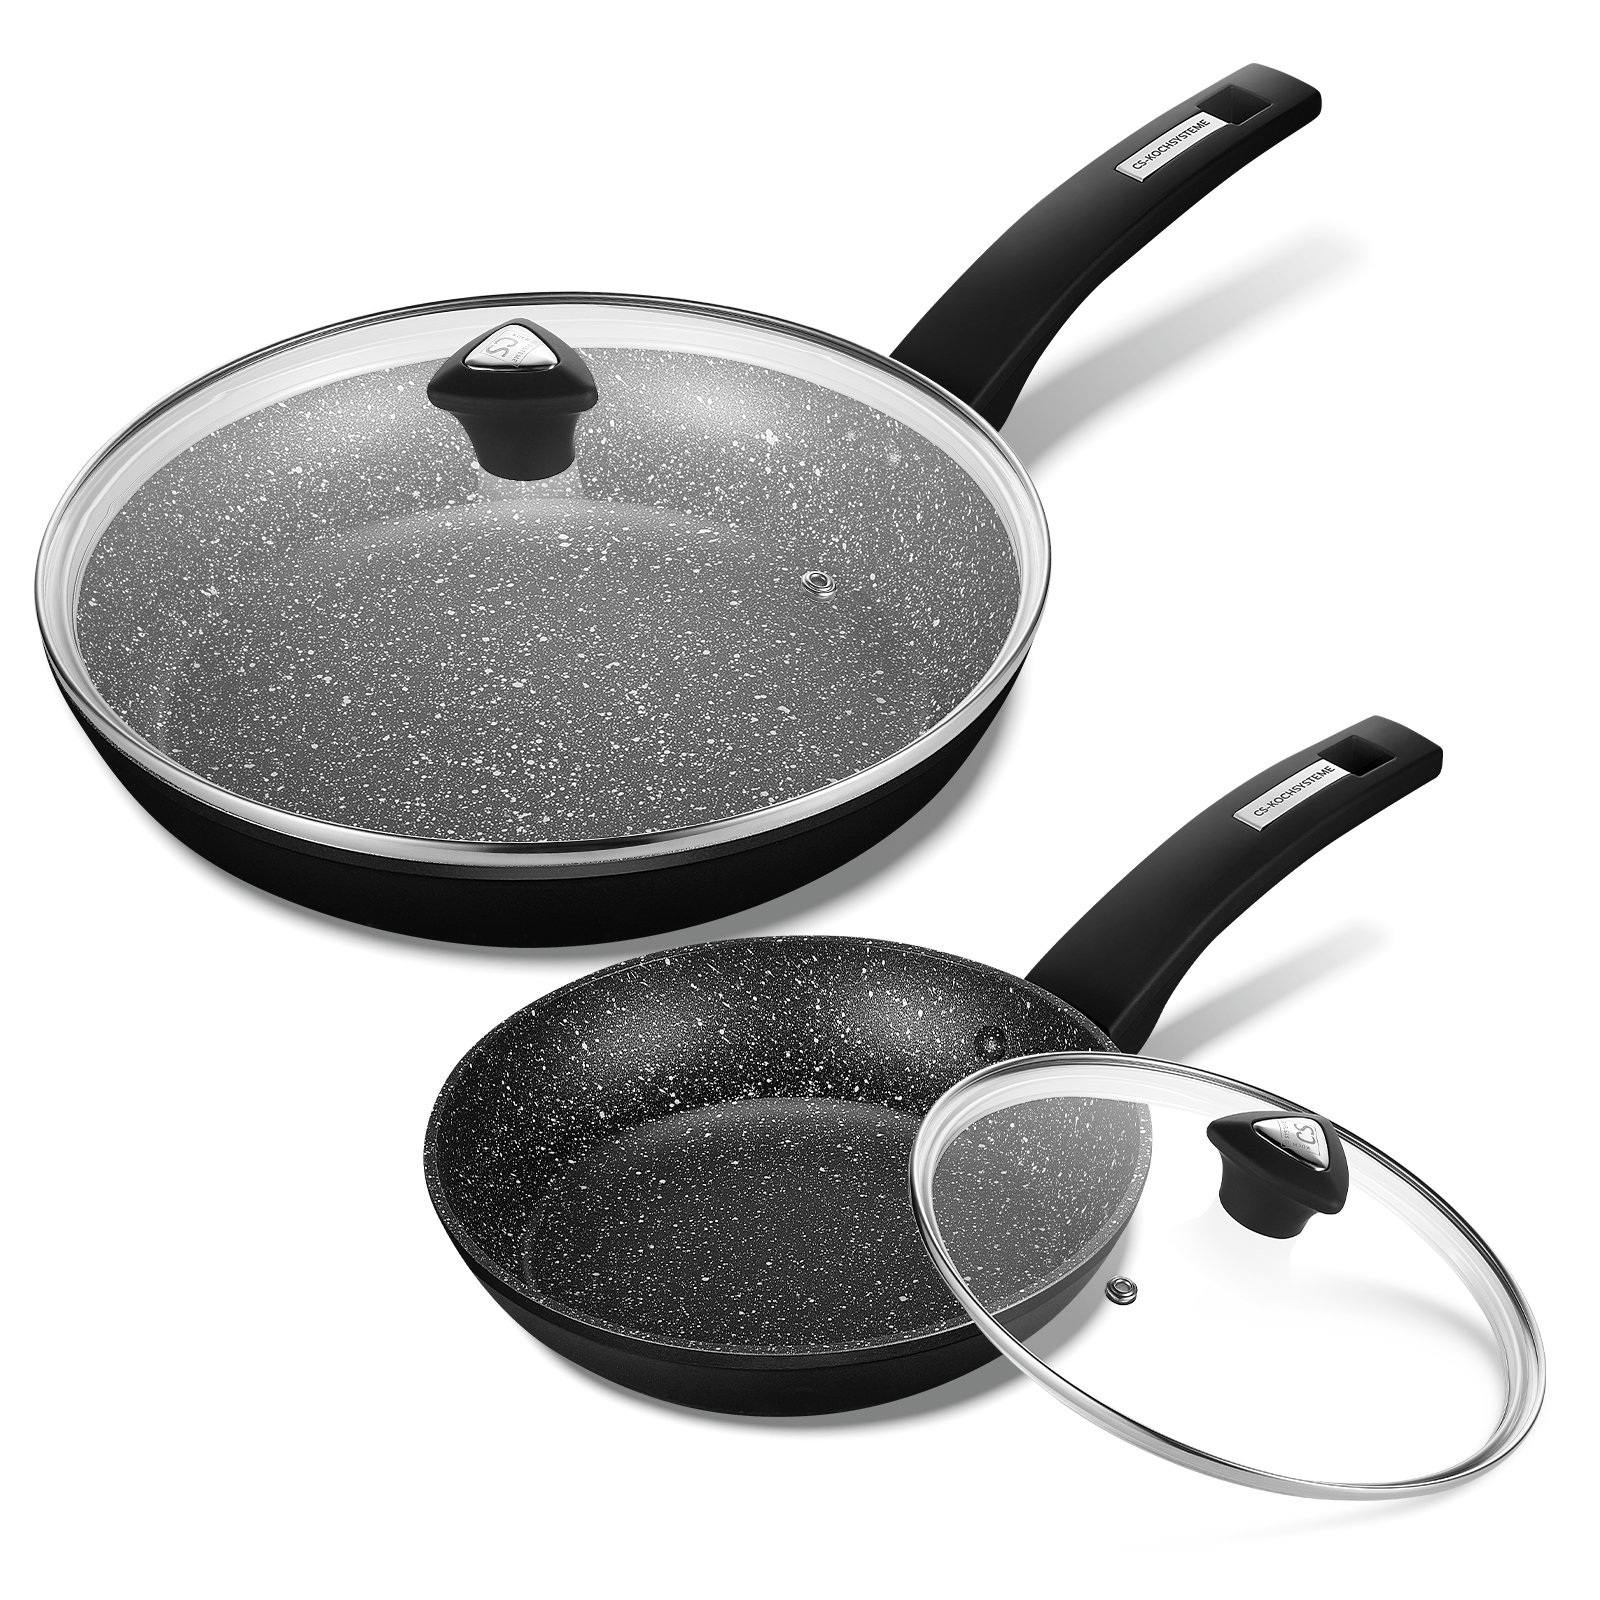 KOCH SYSTEME CS 11 Nonstick Frying Pan-Granite Skillet with Lid, Fry Pan  with APEO and PFOA-Free Stone Derived Coating, Aluminu